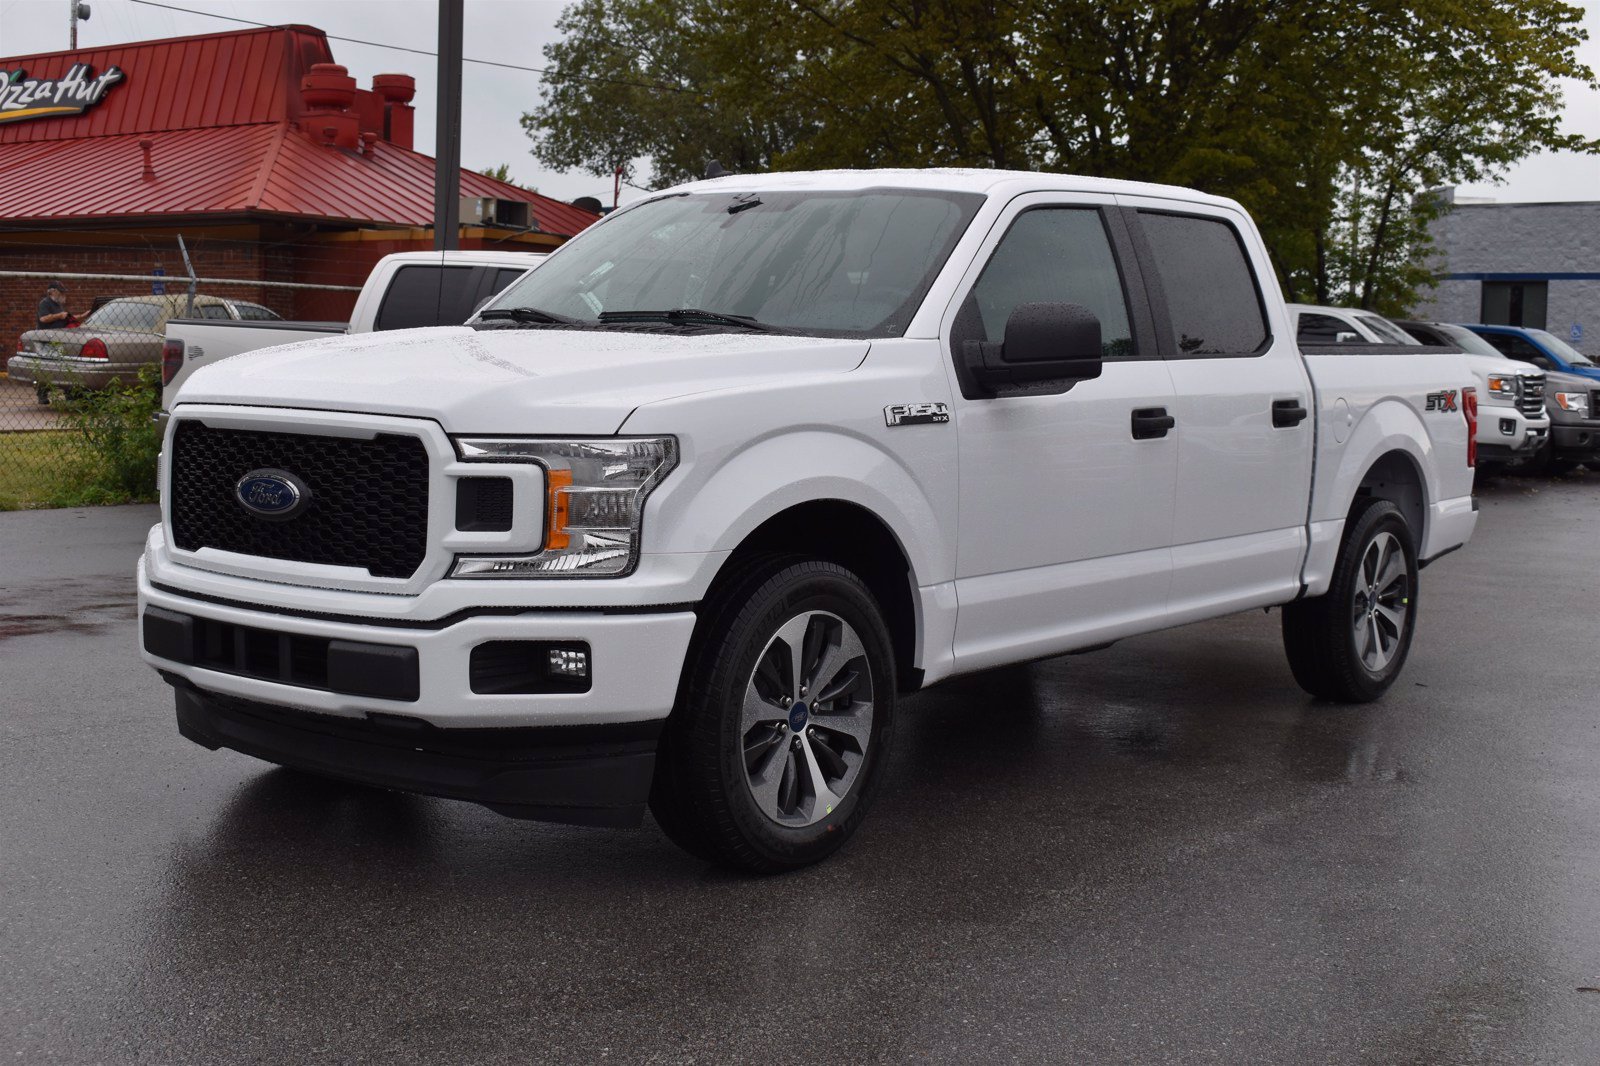 New 2020 Ford F 150 Stx Crew Cab Crew Cab Pickup In Fayetteville